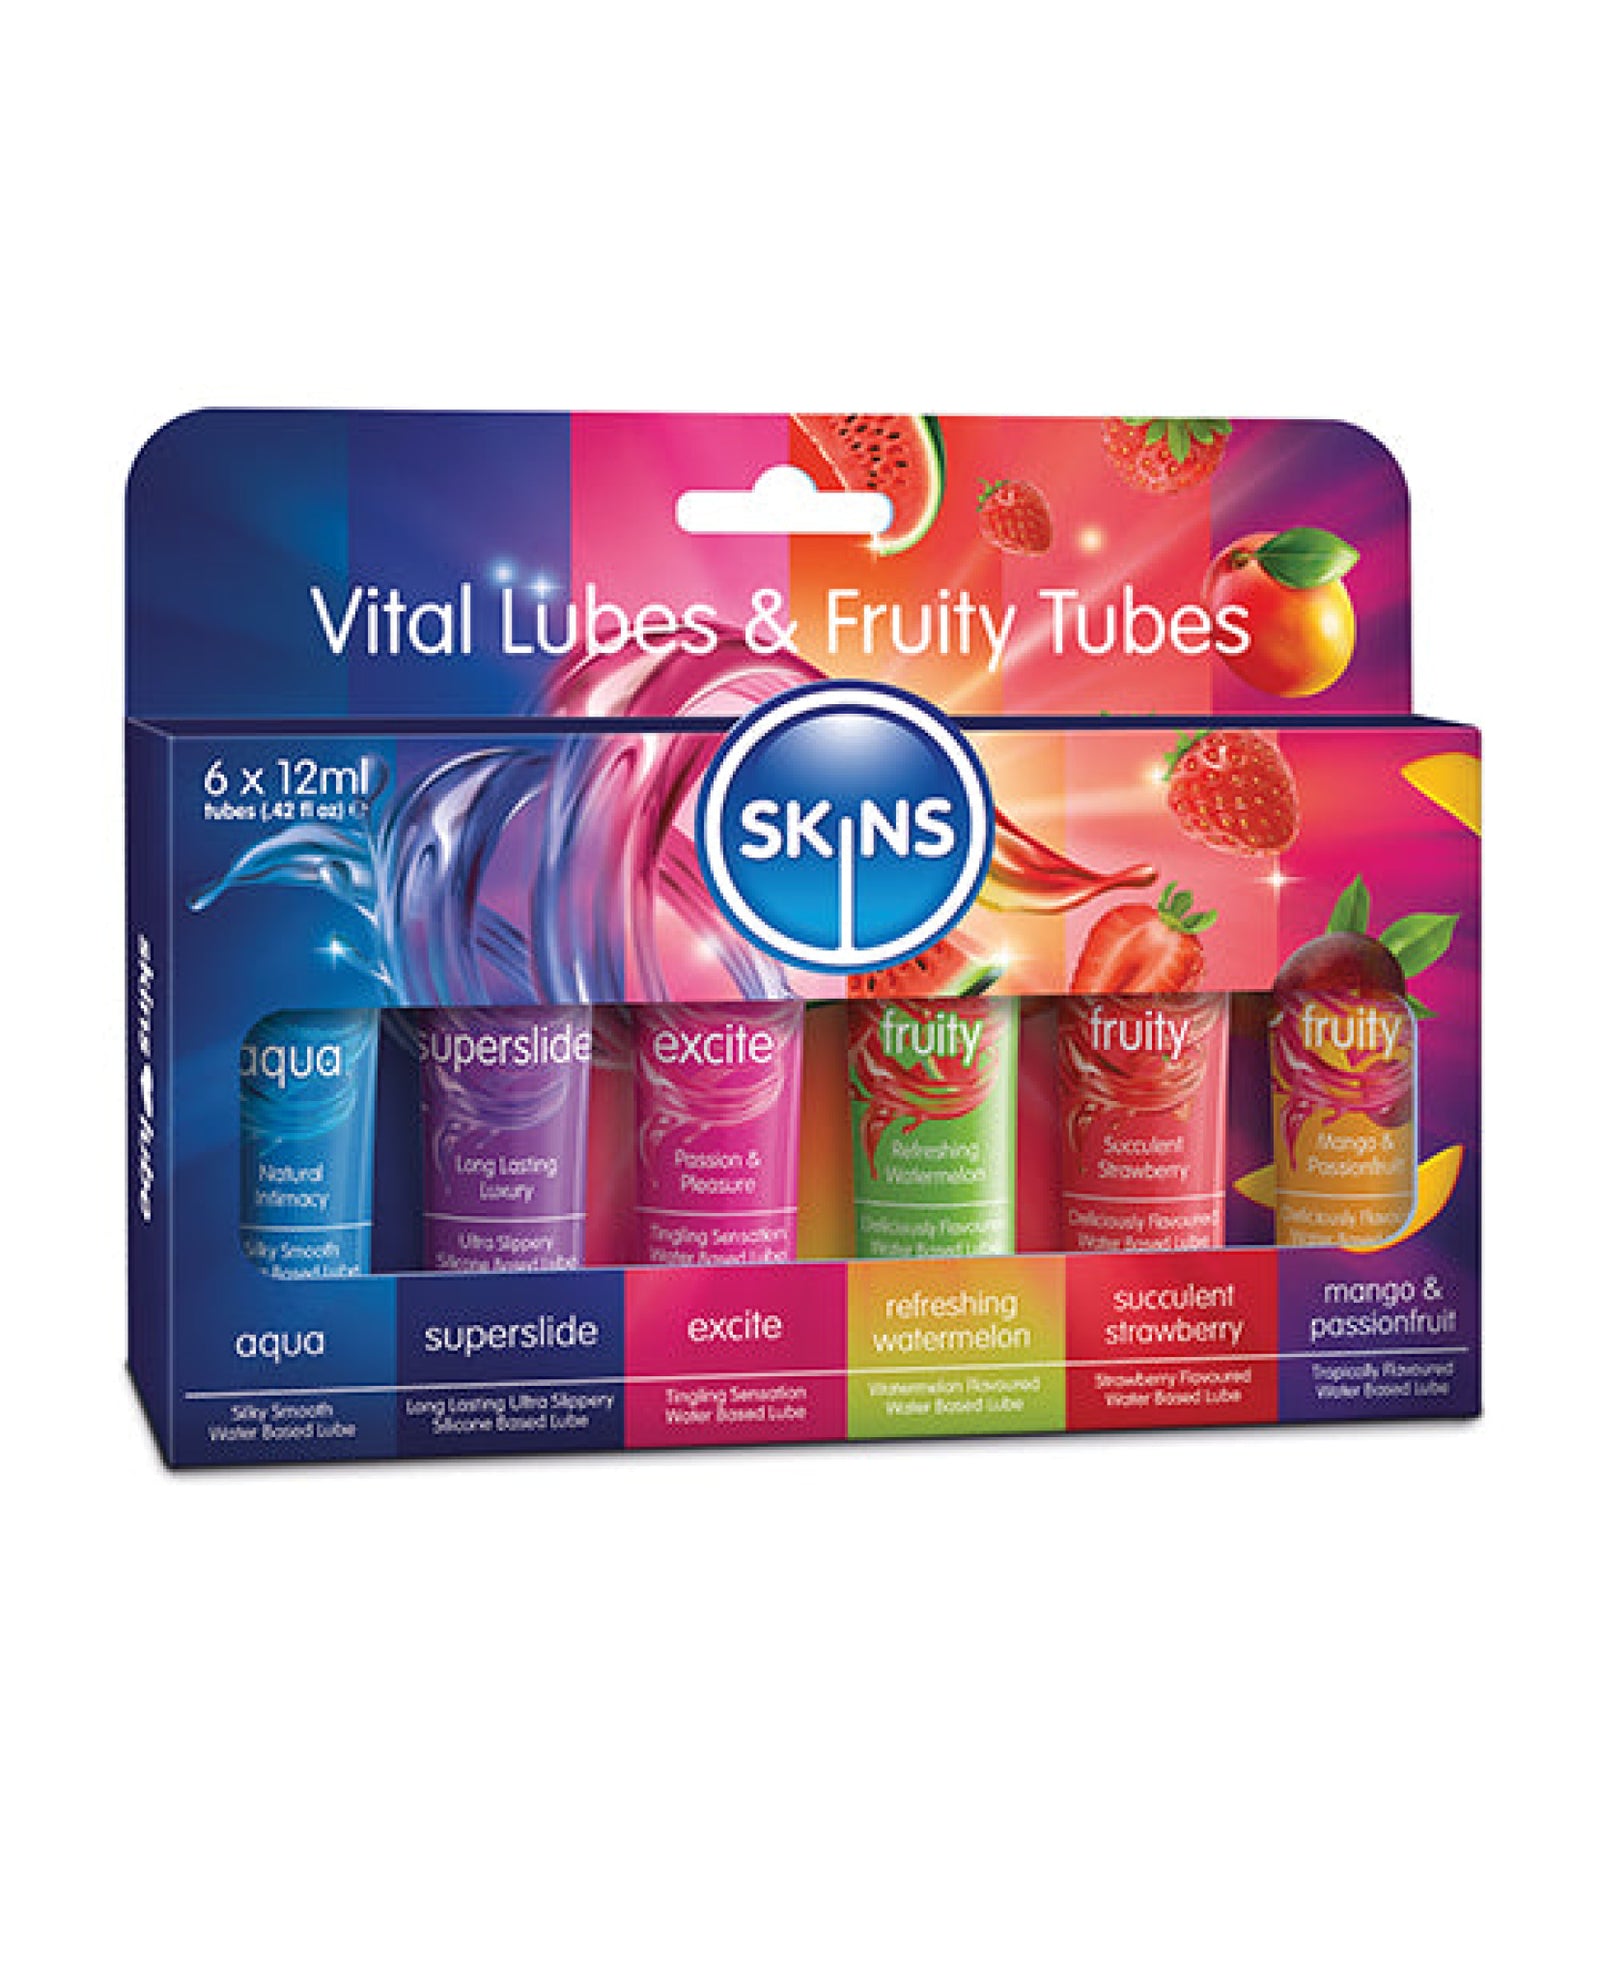 Skins Vital Lubes & Fruity Tubes - 12 ml Tubes Pack of 6 Creative Conceptions